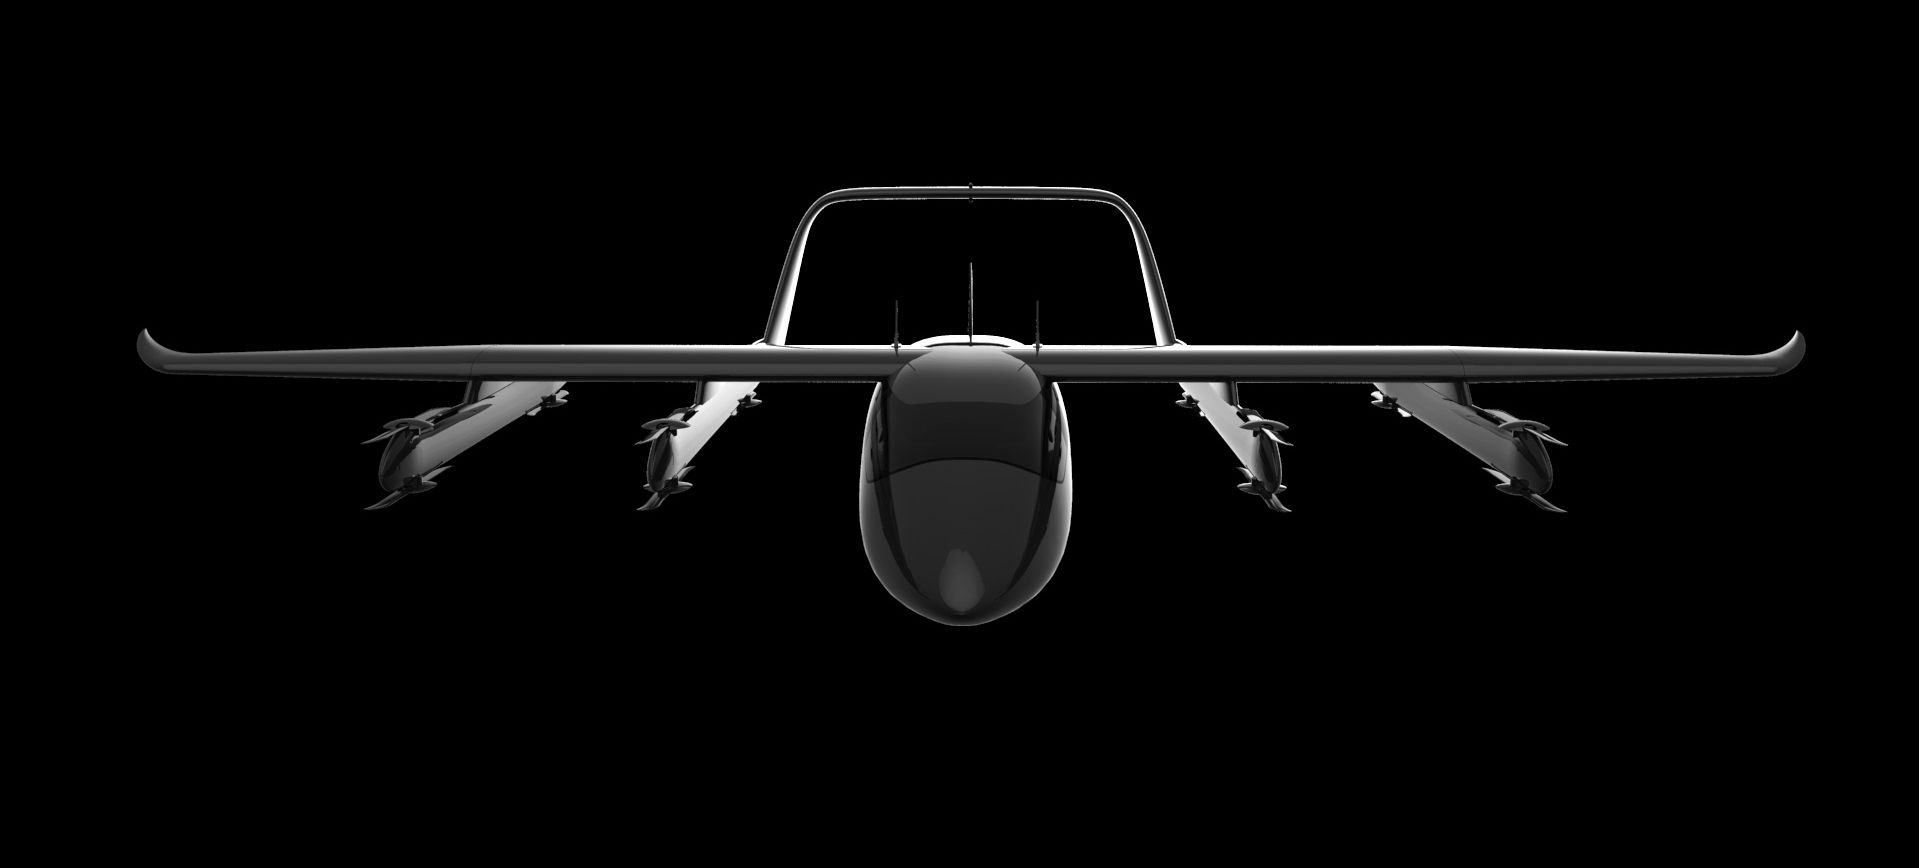 Kiwi.com invests in future of vertical take-off and landing aircraft with Zuri